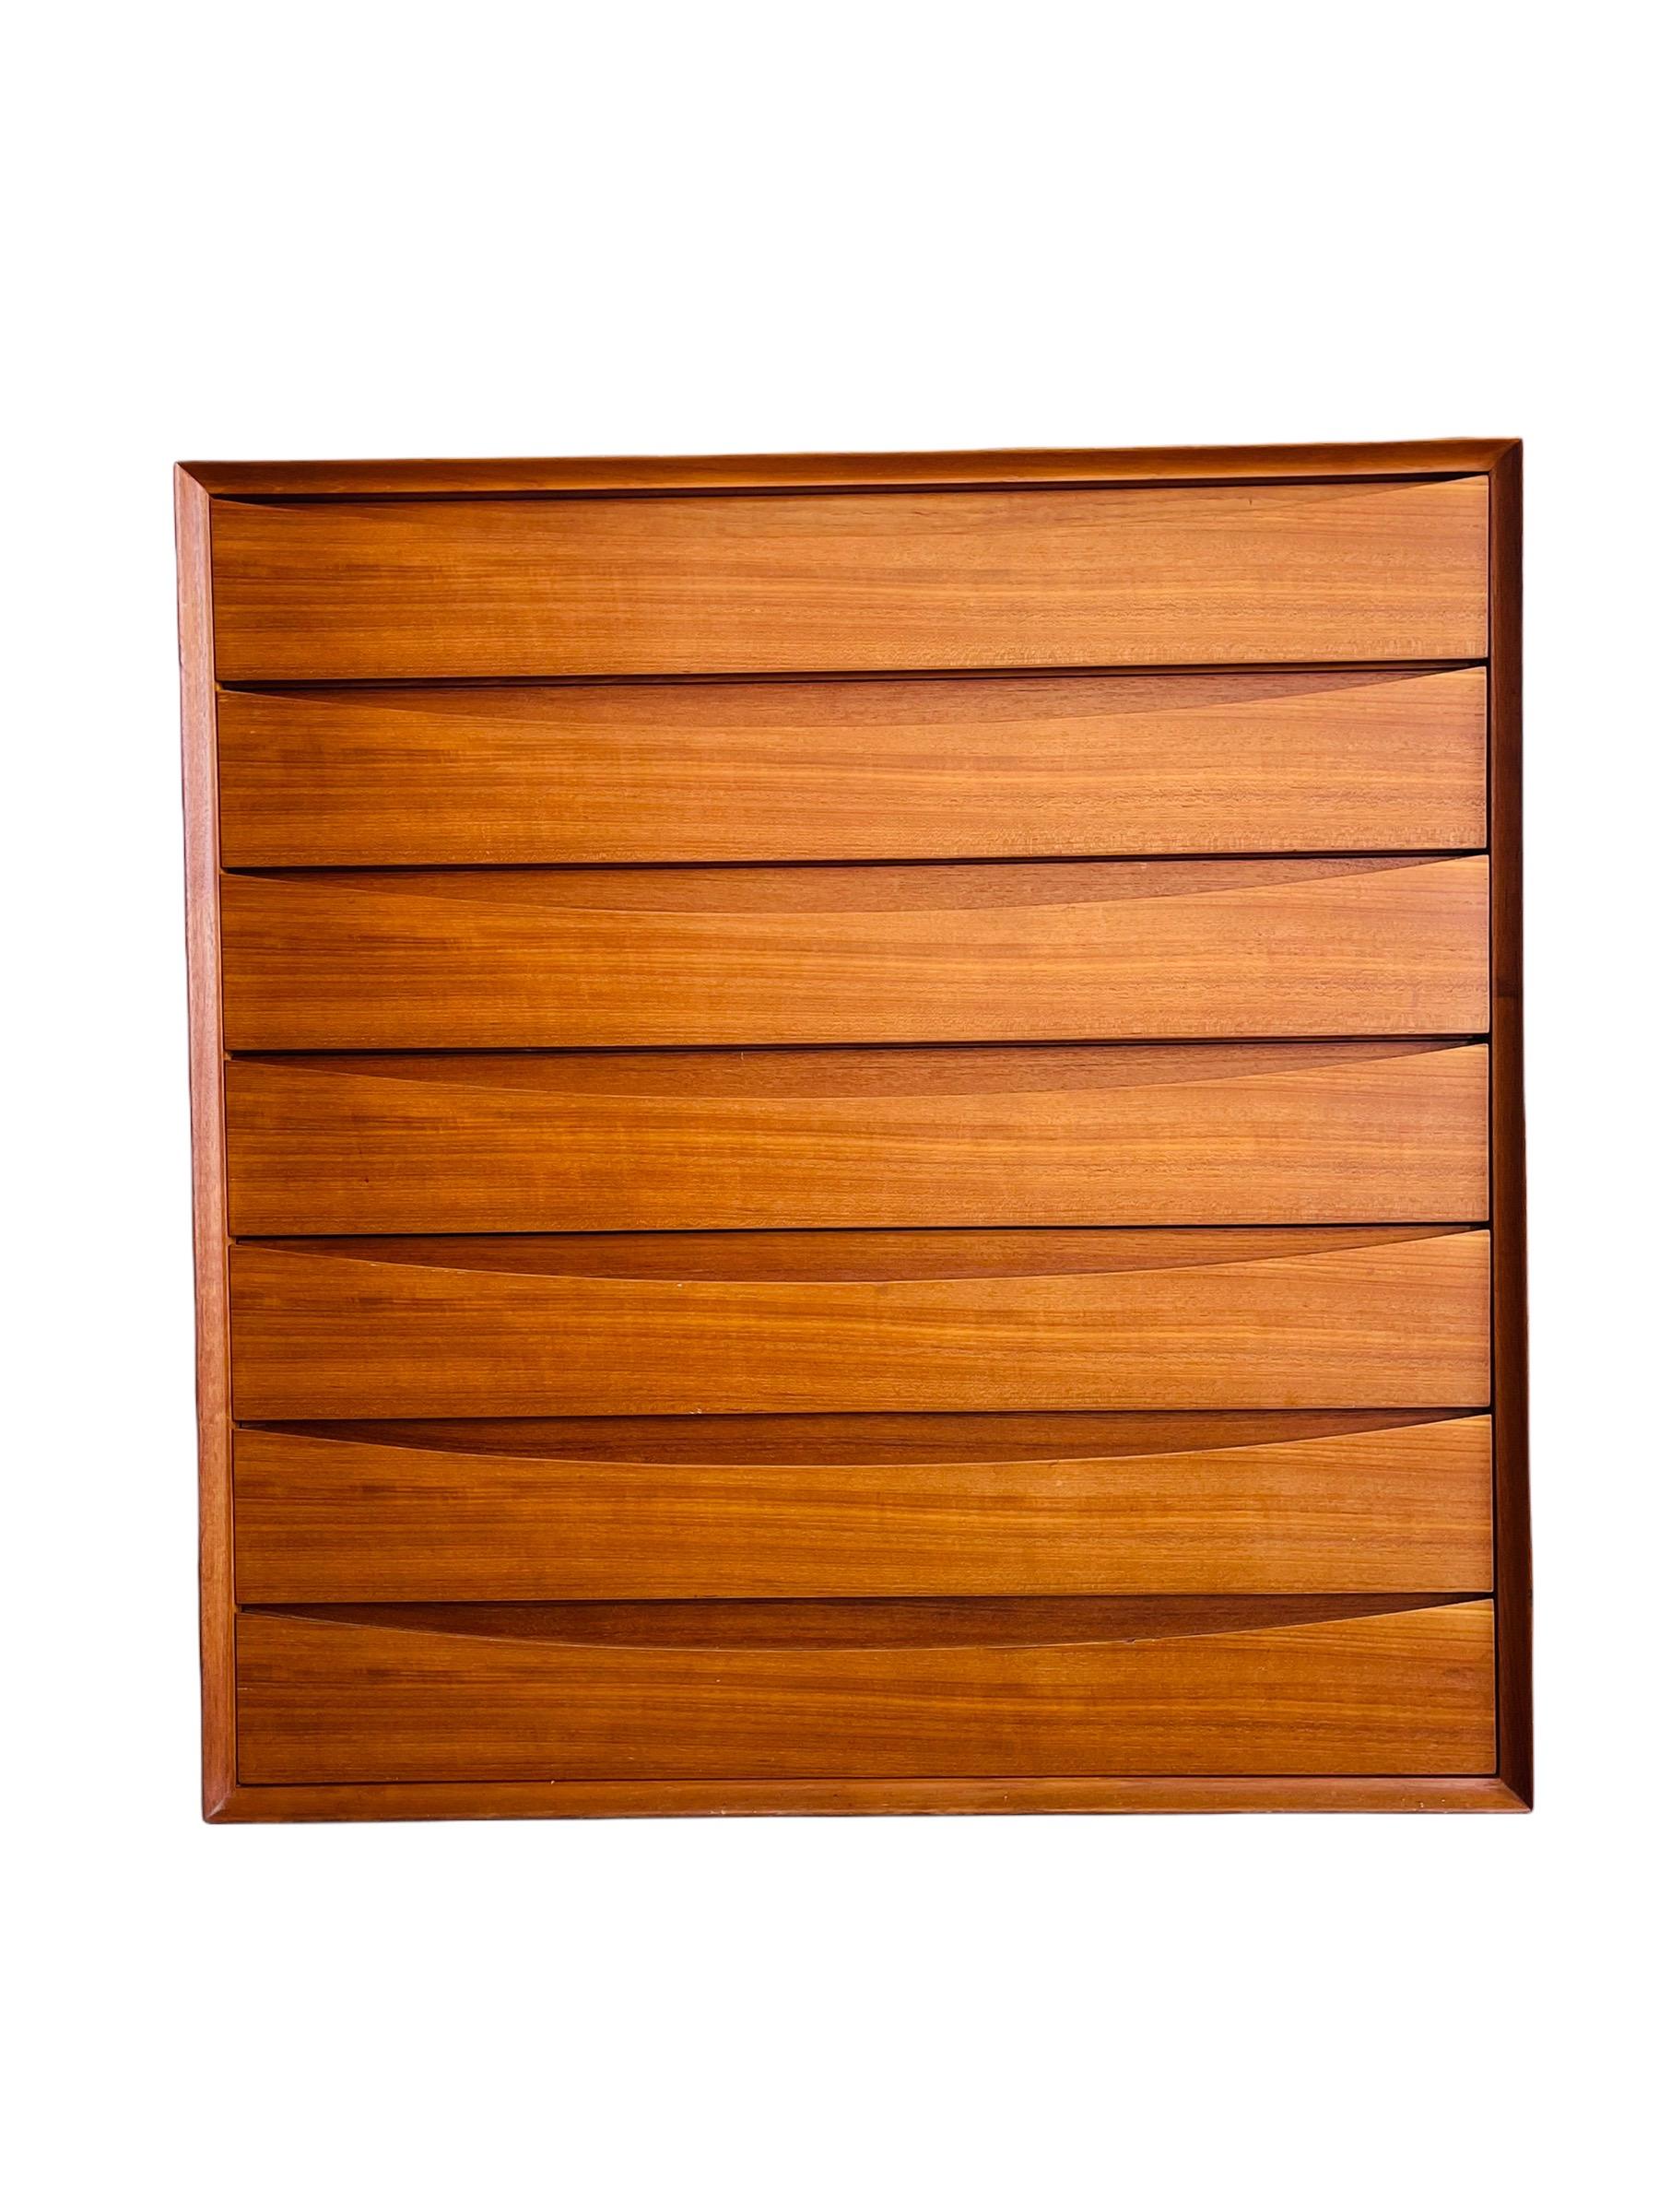 Here is a stunning Danish Modern teak dresser by Arne Vodder for Sabist Furniture of Denmark. The dresser is equipped with seven sculpted front dovetail drawers, dividers and a sliding tray on the top drawer. The dresser is in good vintage condition